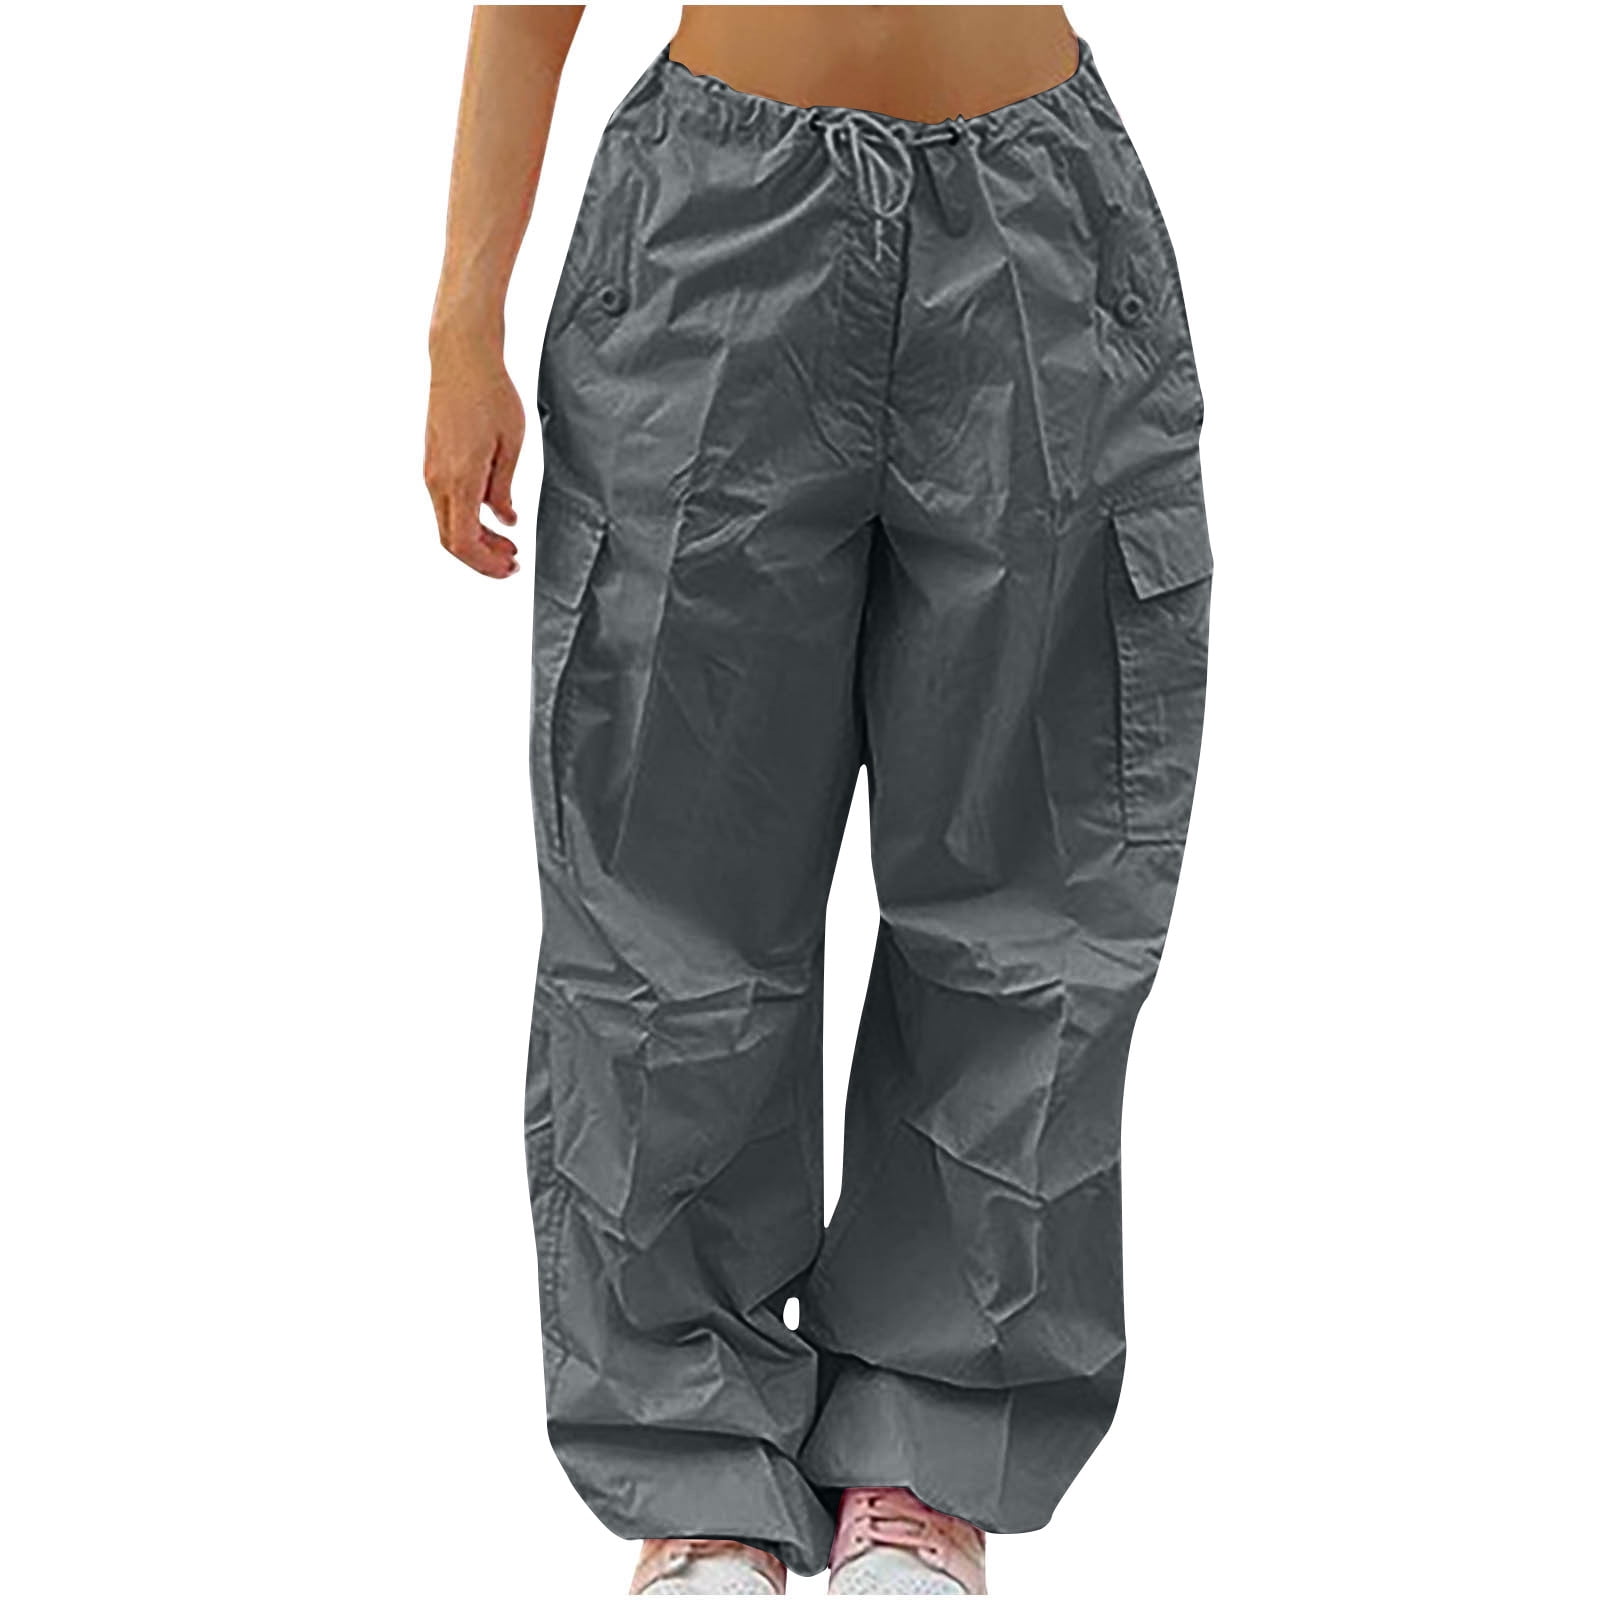  Dreay Parachute Pants for Women-Drawstring Elastic Baggy Hiking  Cargo Pants-Stylish Casual Loose Wide Leg Y2K Pants XY22031-Grey-S : Sports  & Outdoors